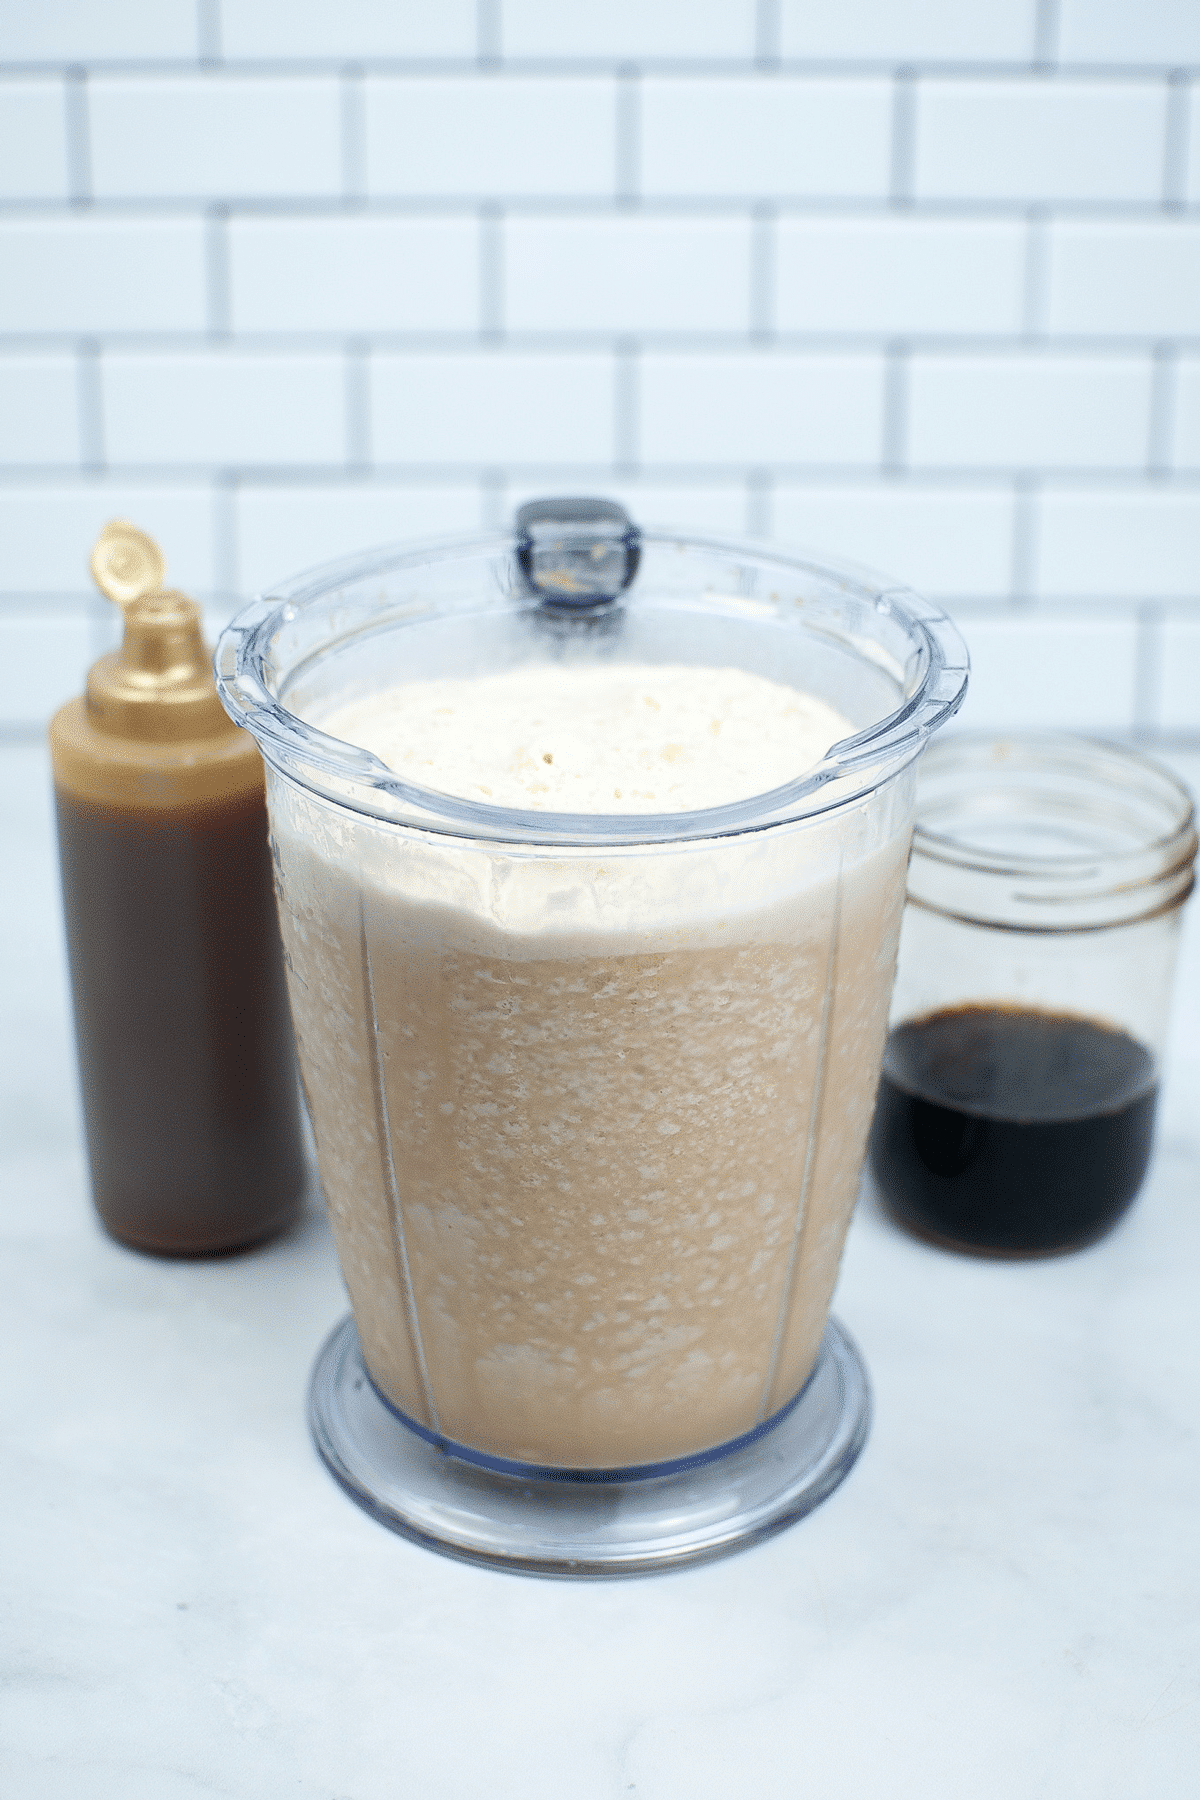 Blended ingredients for Starbucks Copycat Caramel Frappuccino